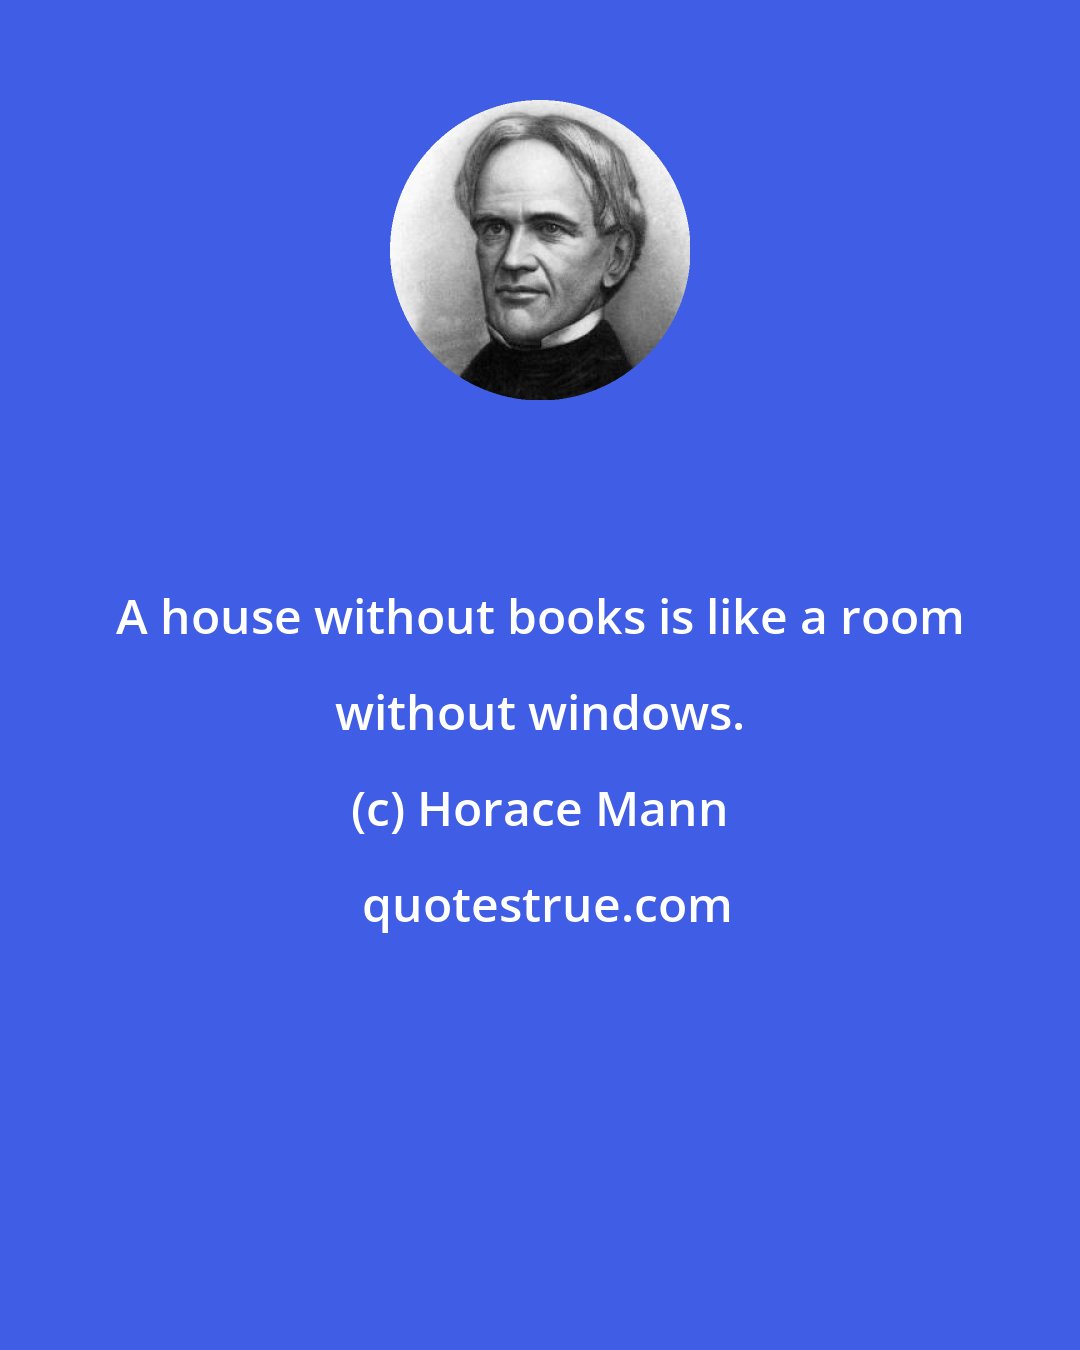 Horace Mann: A house without books is like a room without windows.